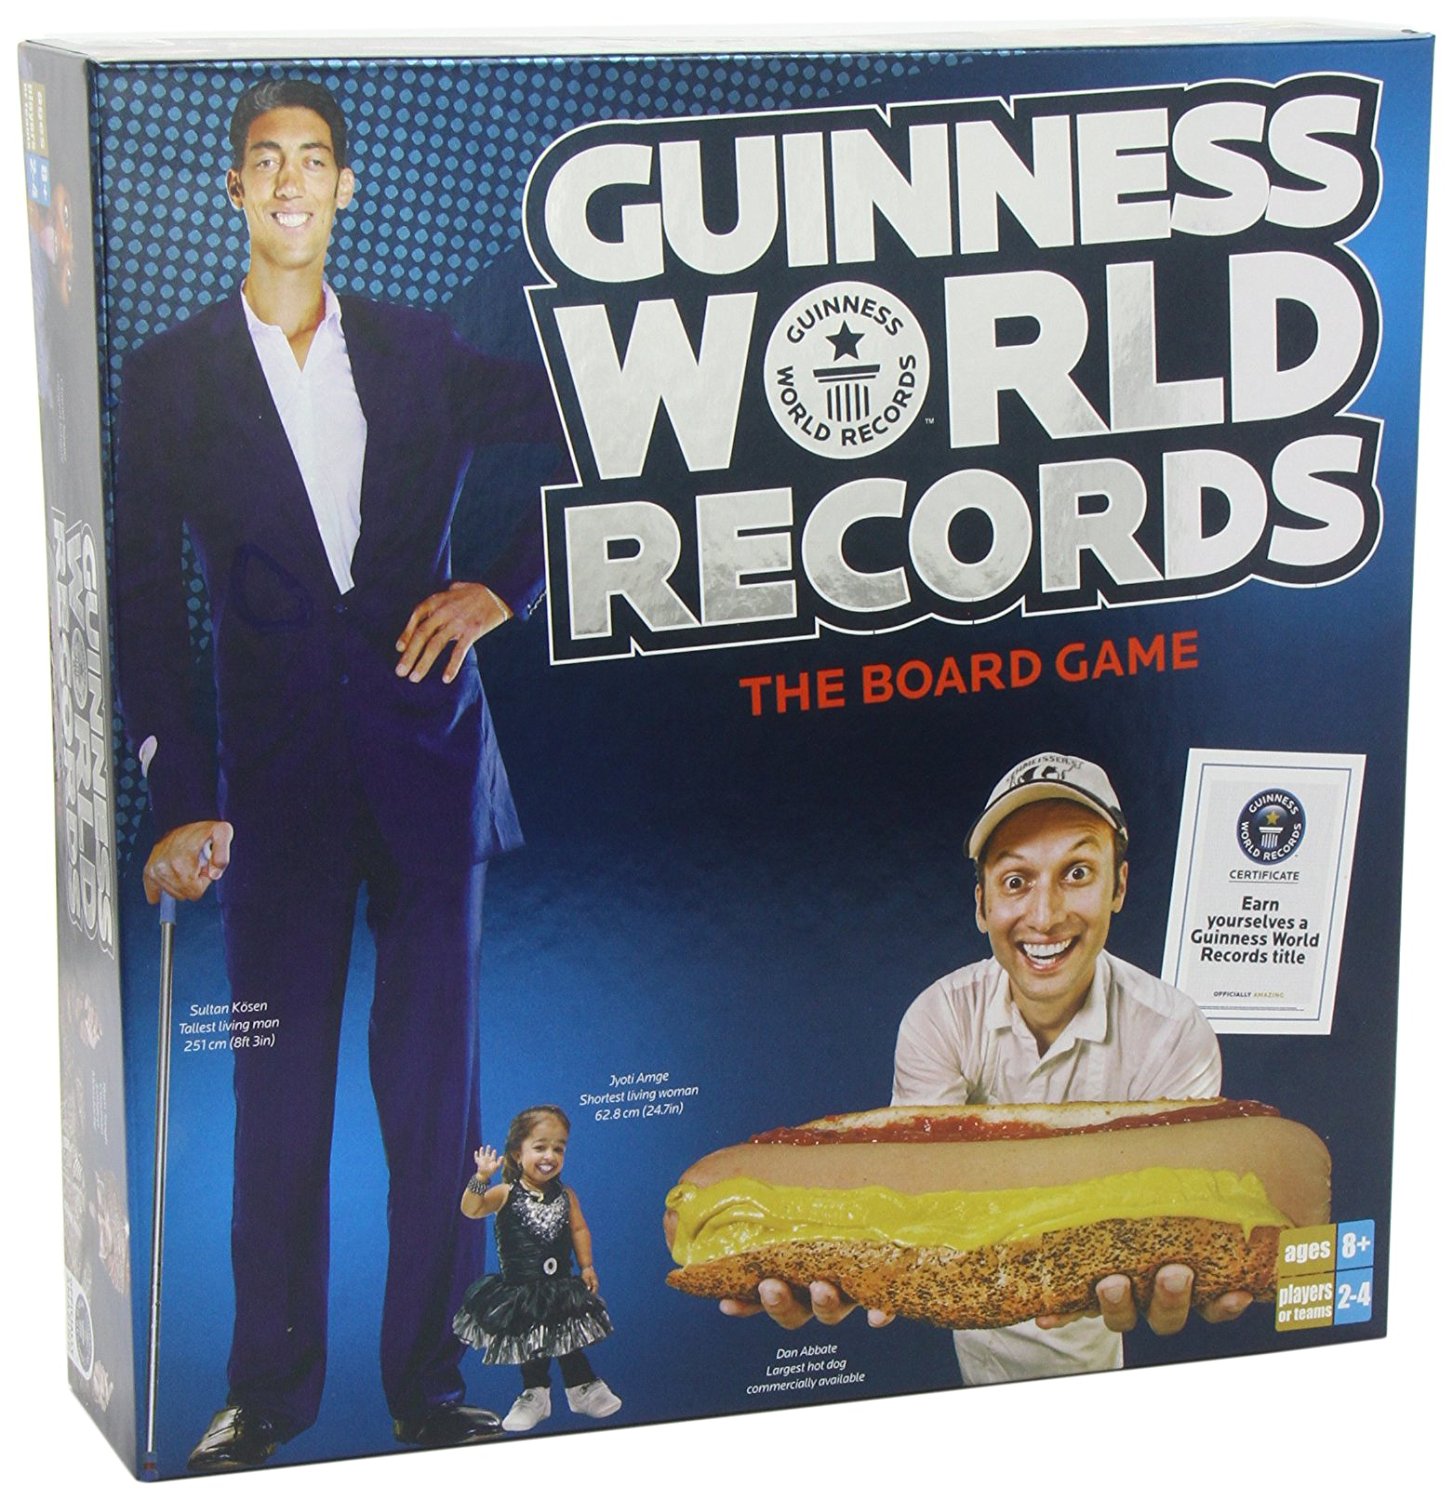 Guinness World Records Officially Amazing Board Game